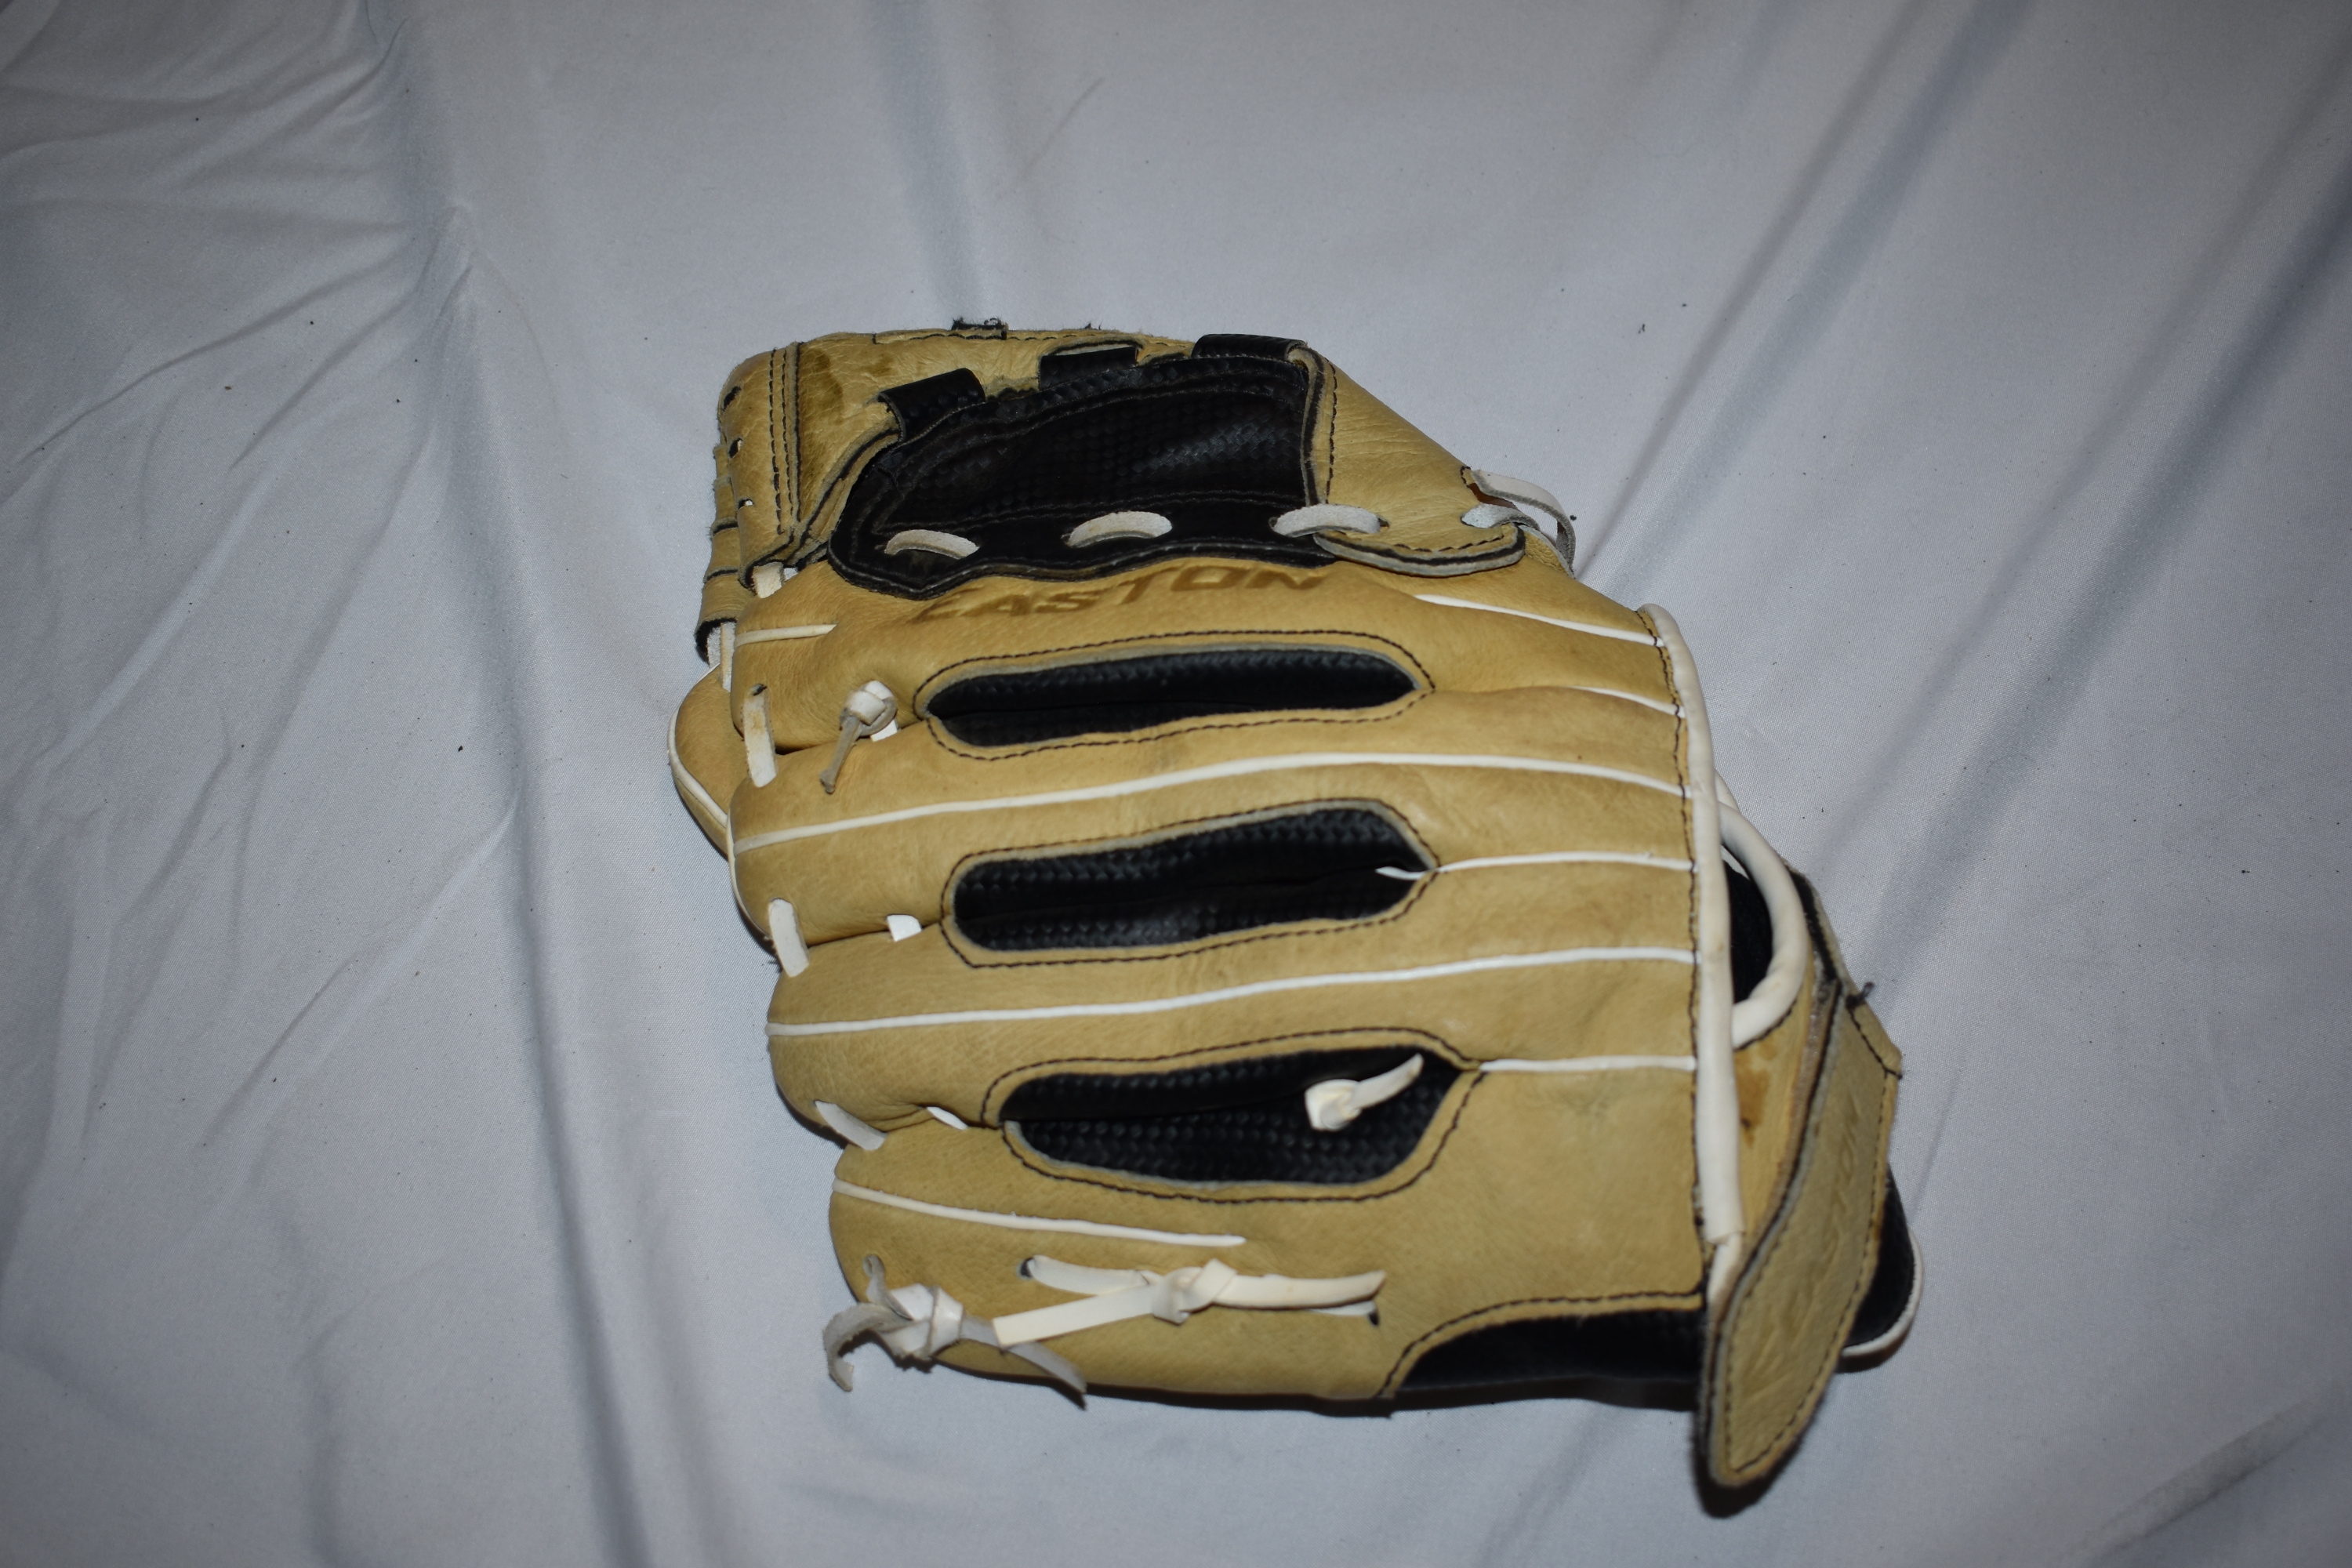 Easton Fastpitch Series Softball Glove NYFP1150, Brown/Black, 11.5 Inches